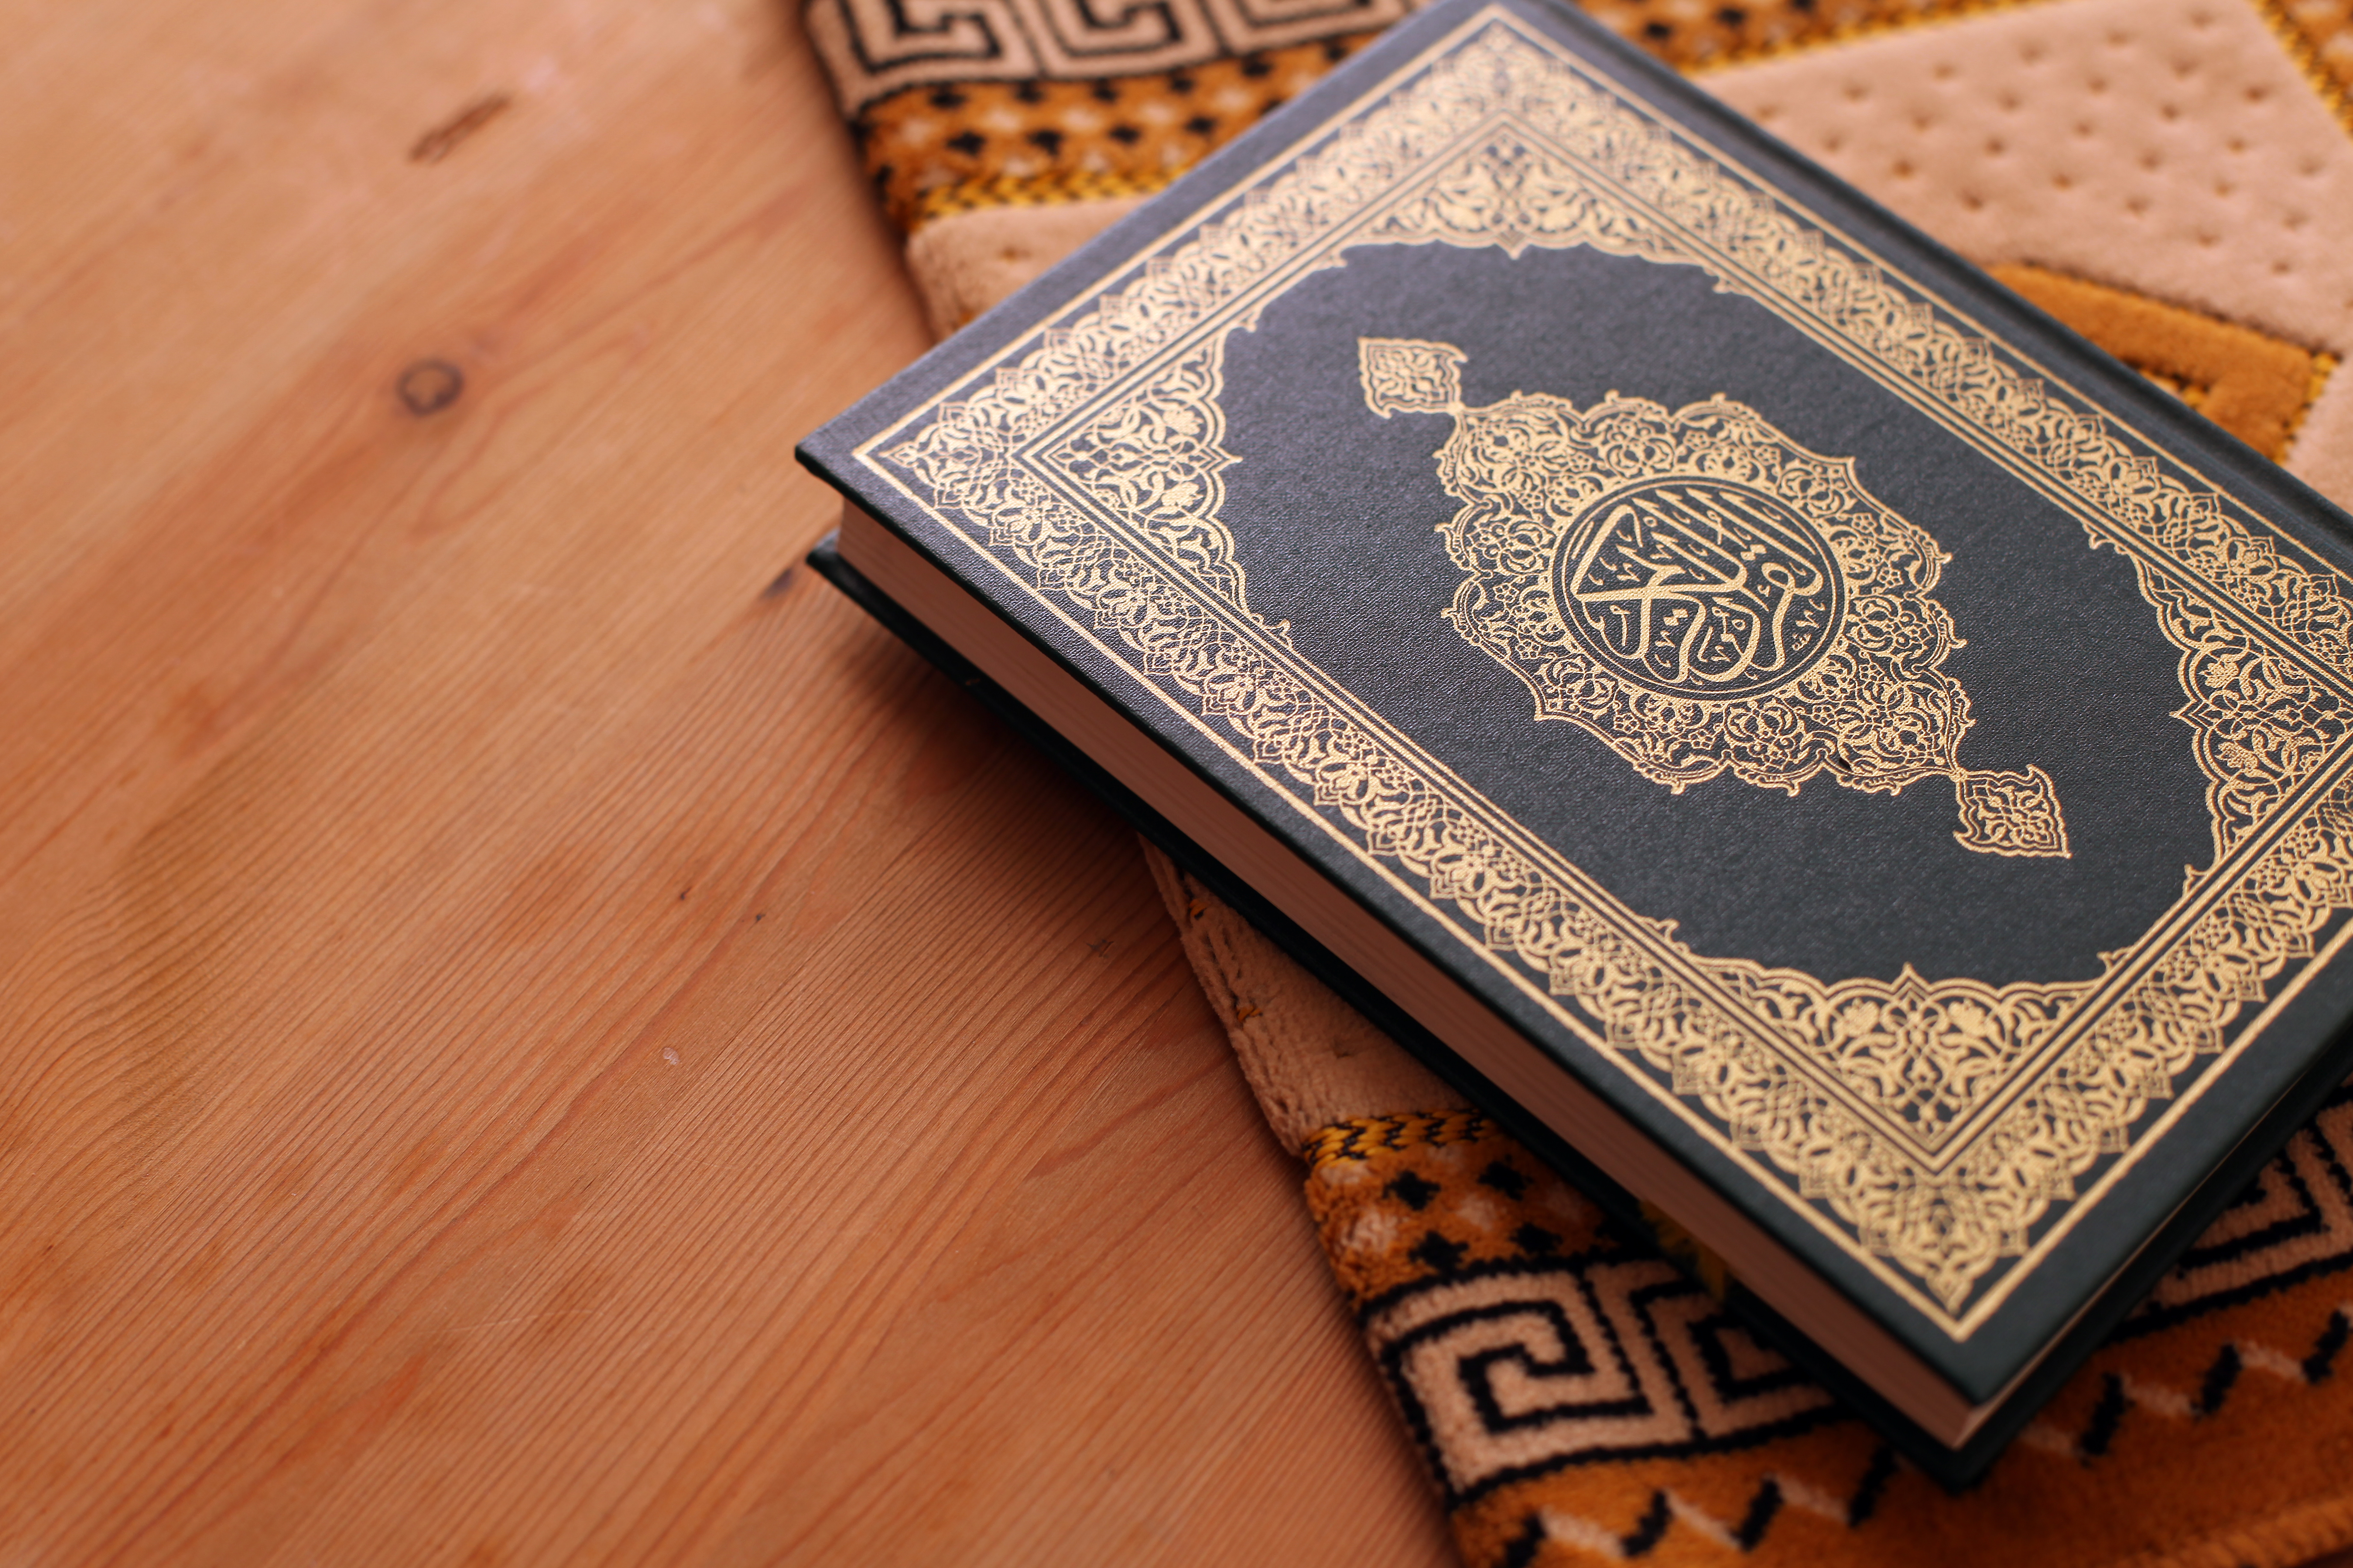 How Can a Housewife Learn the Quran?